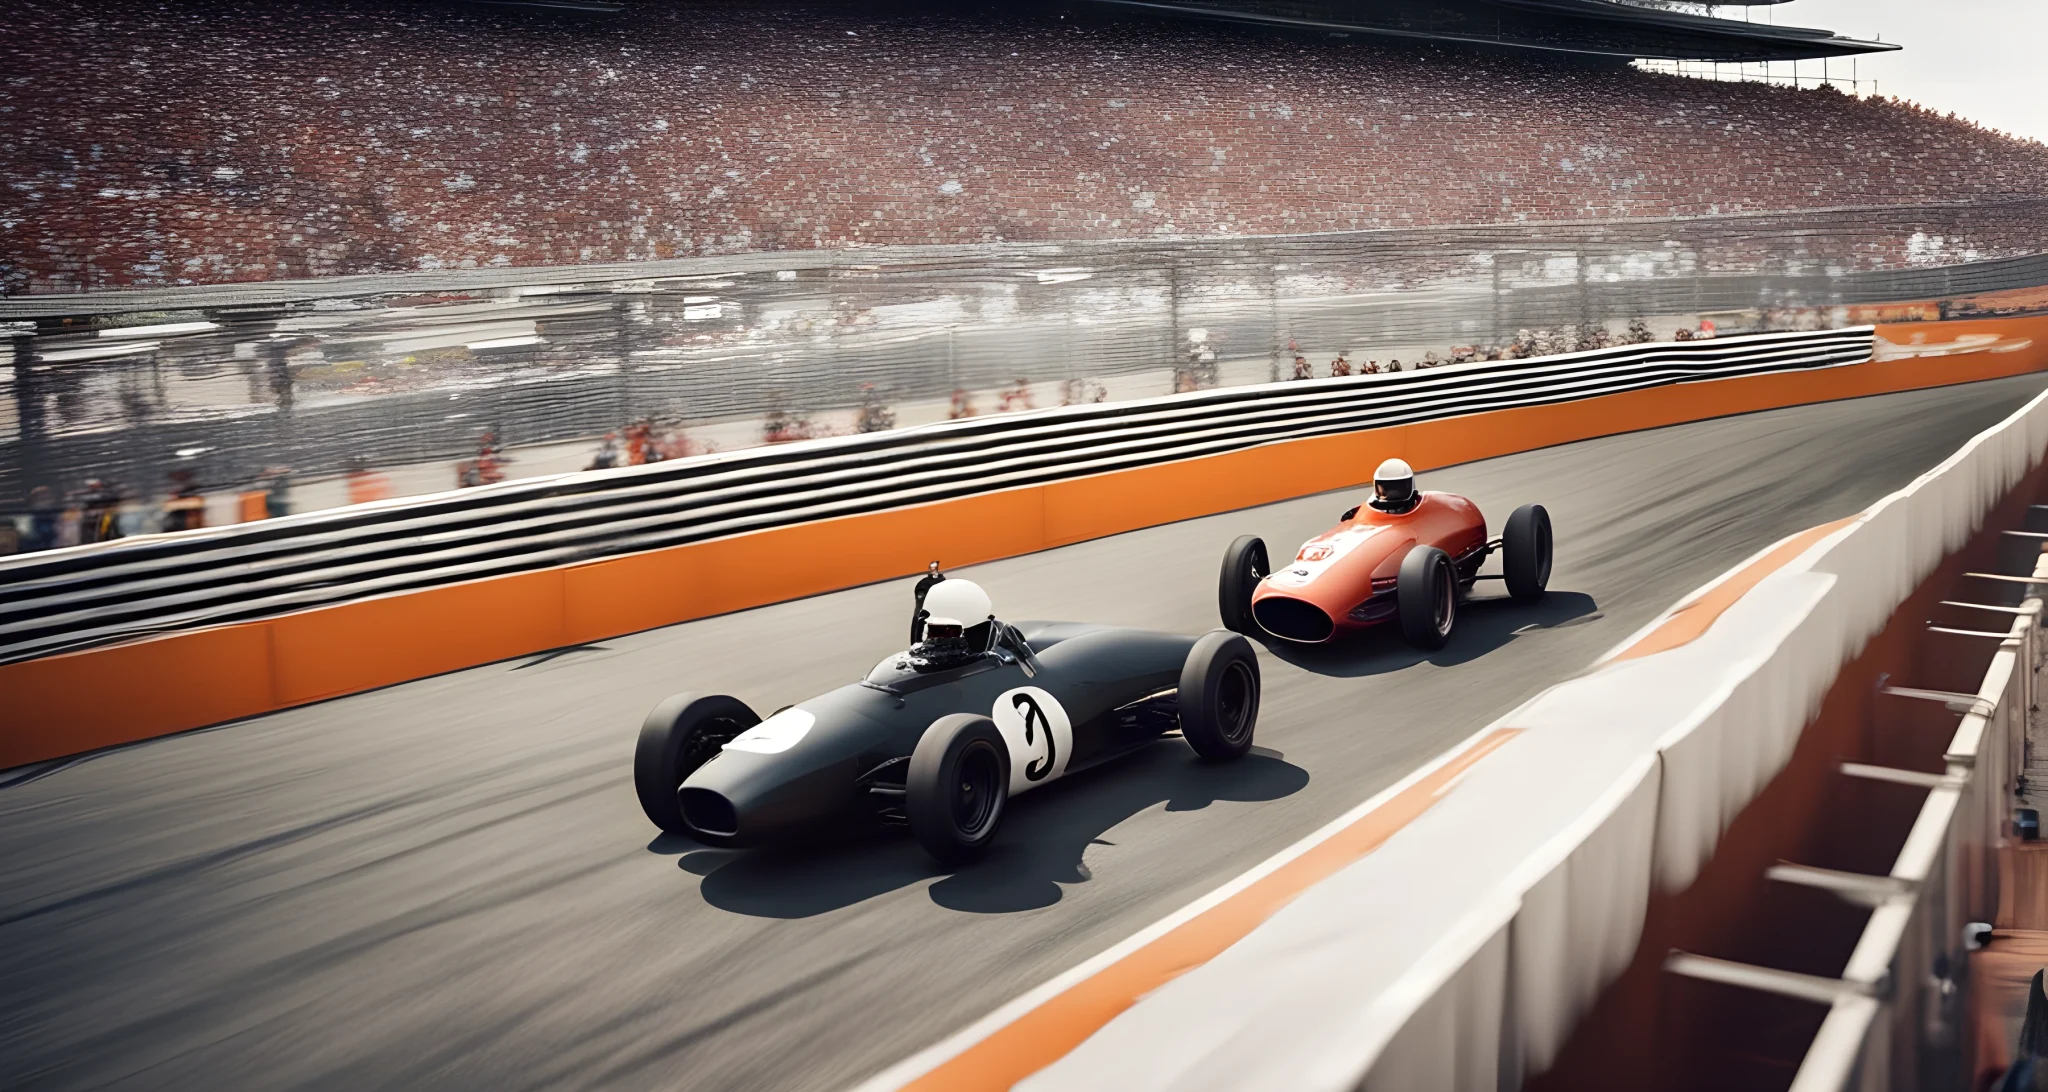 The image shows two sleek racing cars on a winding race track, surrounded by barriers and grandstands filled with spectators.